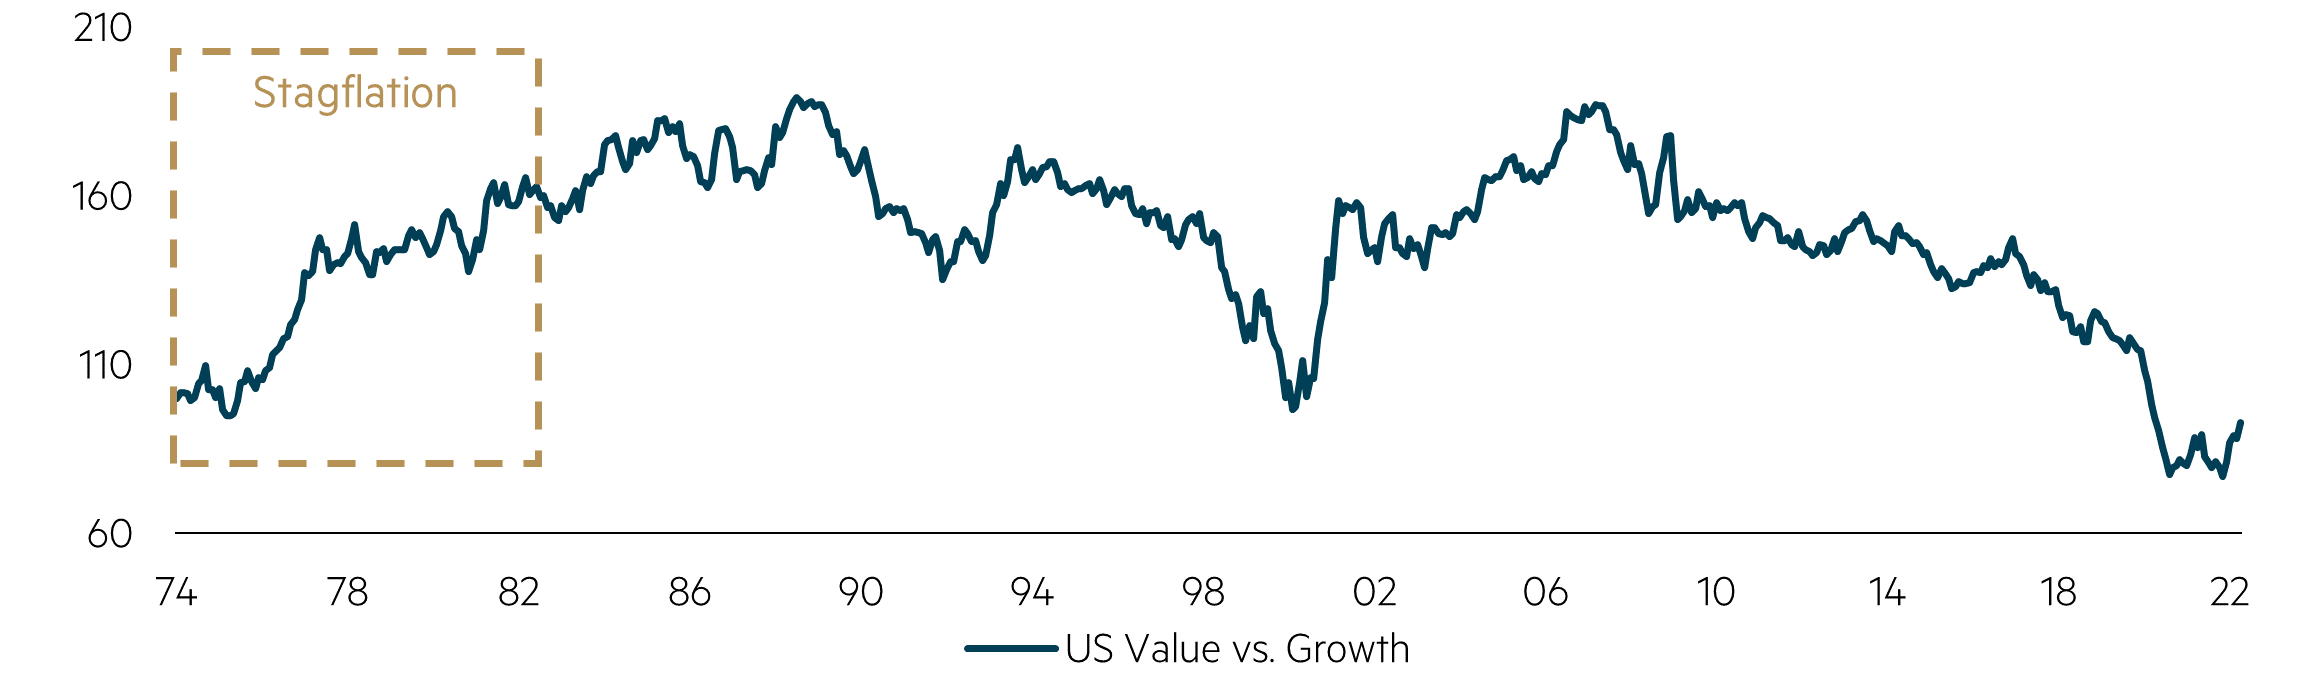 Stagflation – value vs growth